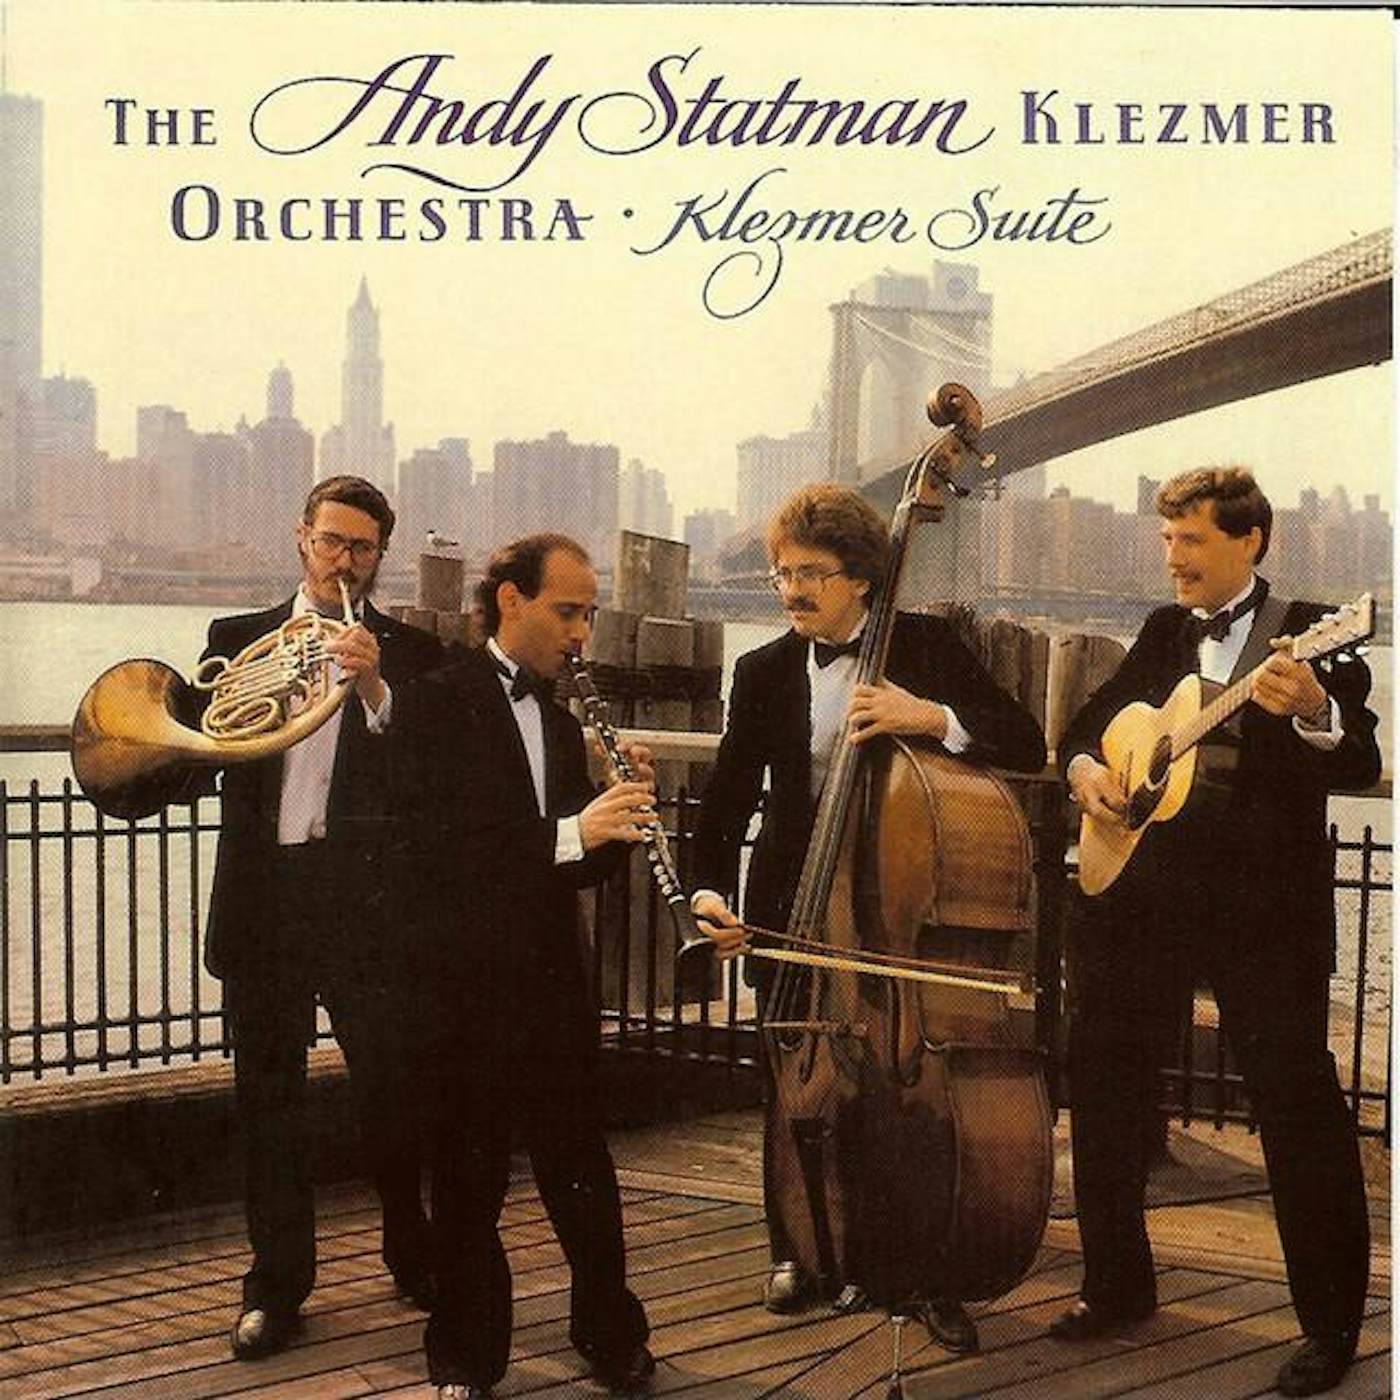 The Andy Statman Klezmer Orchestra